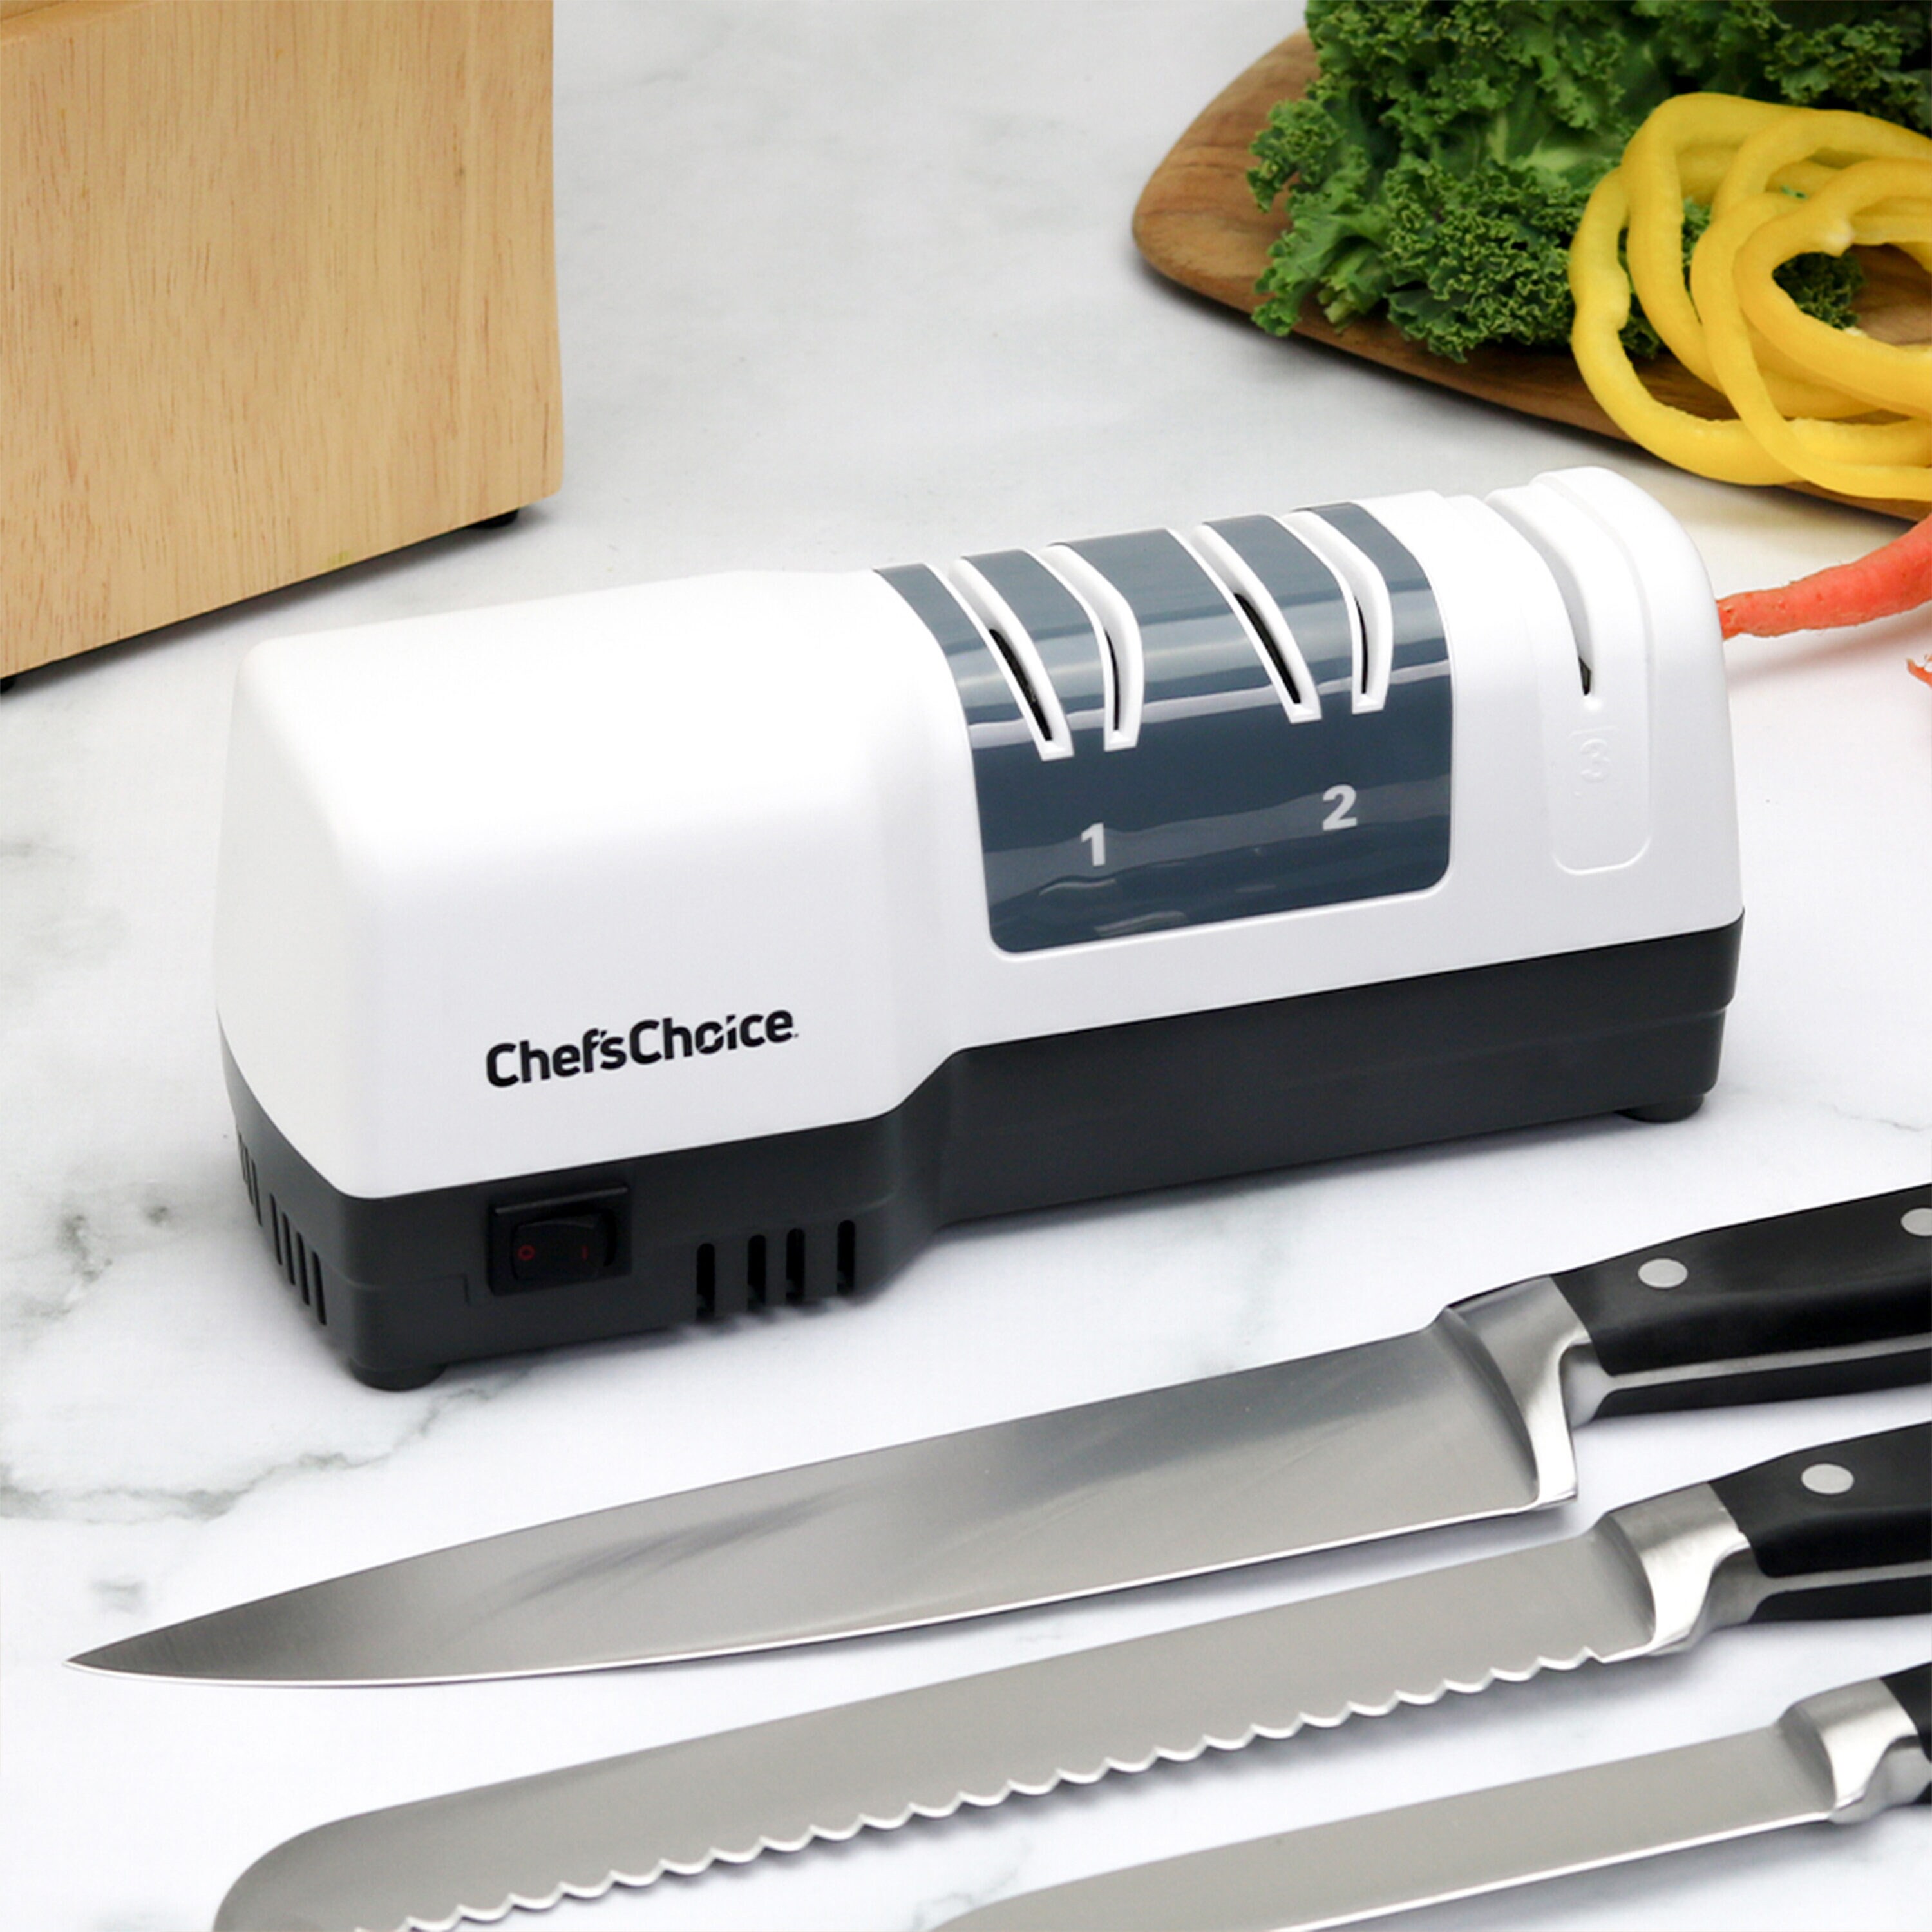 Chef'sChoice Diamond Hone AngleSelect Model 1520 Electric Knife